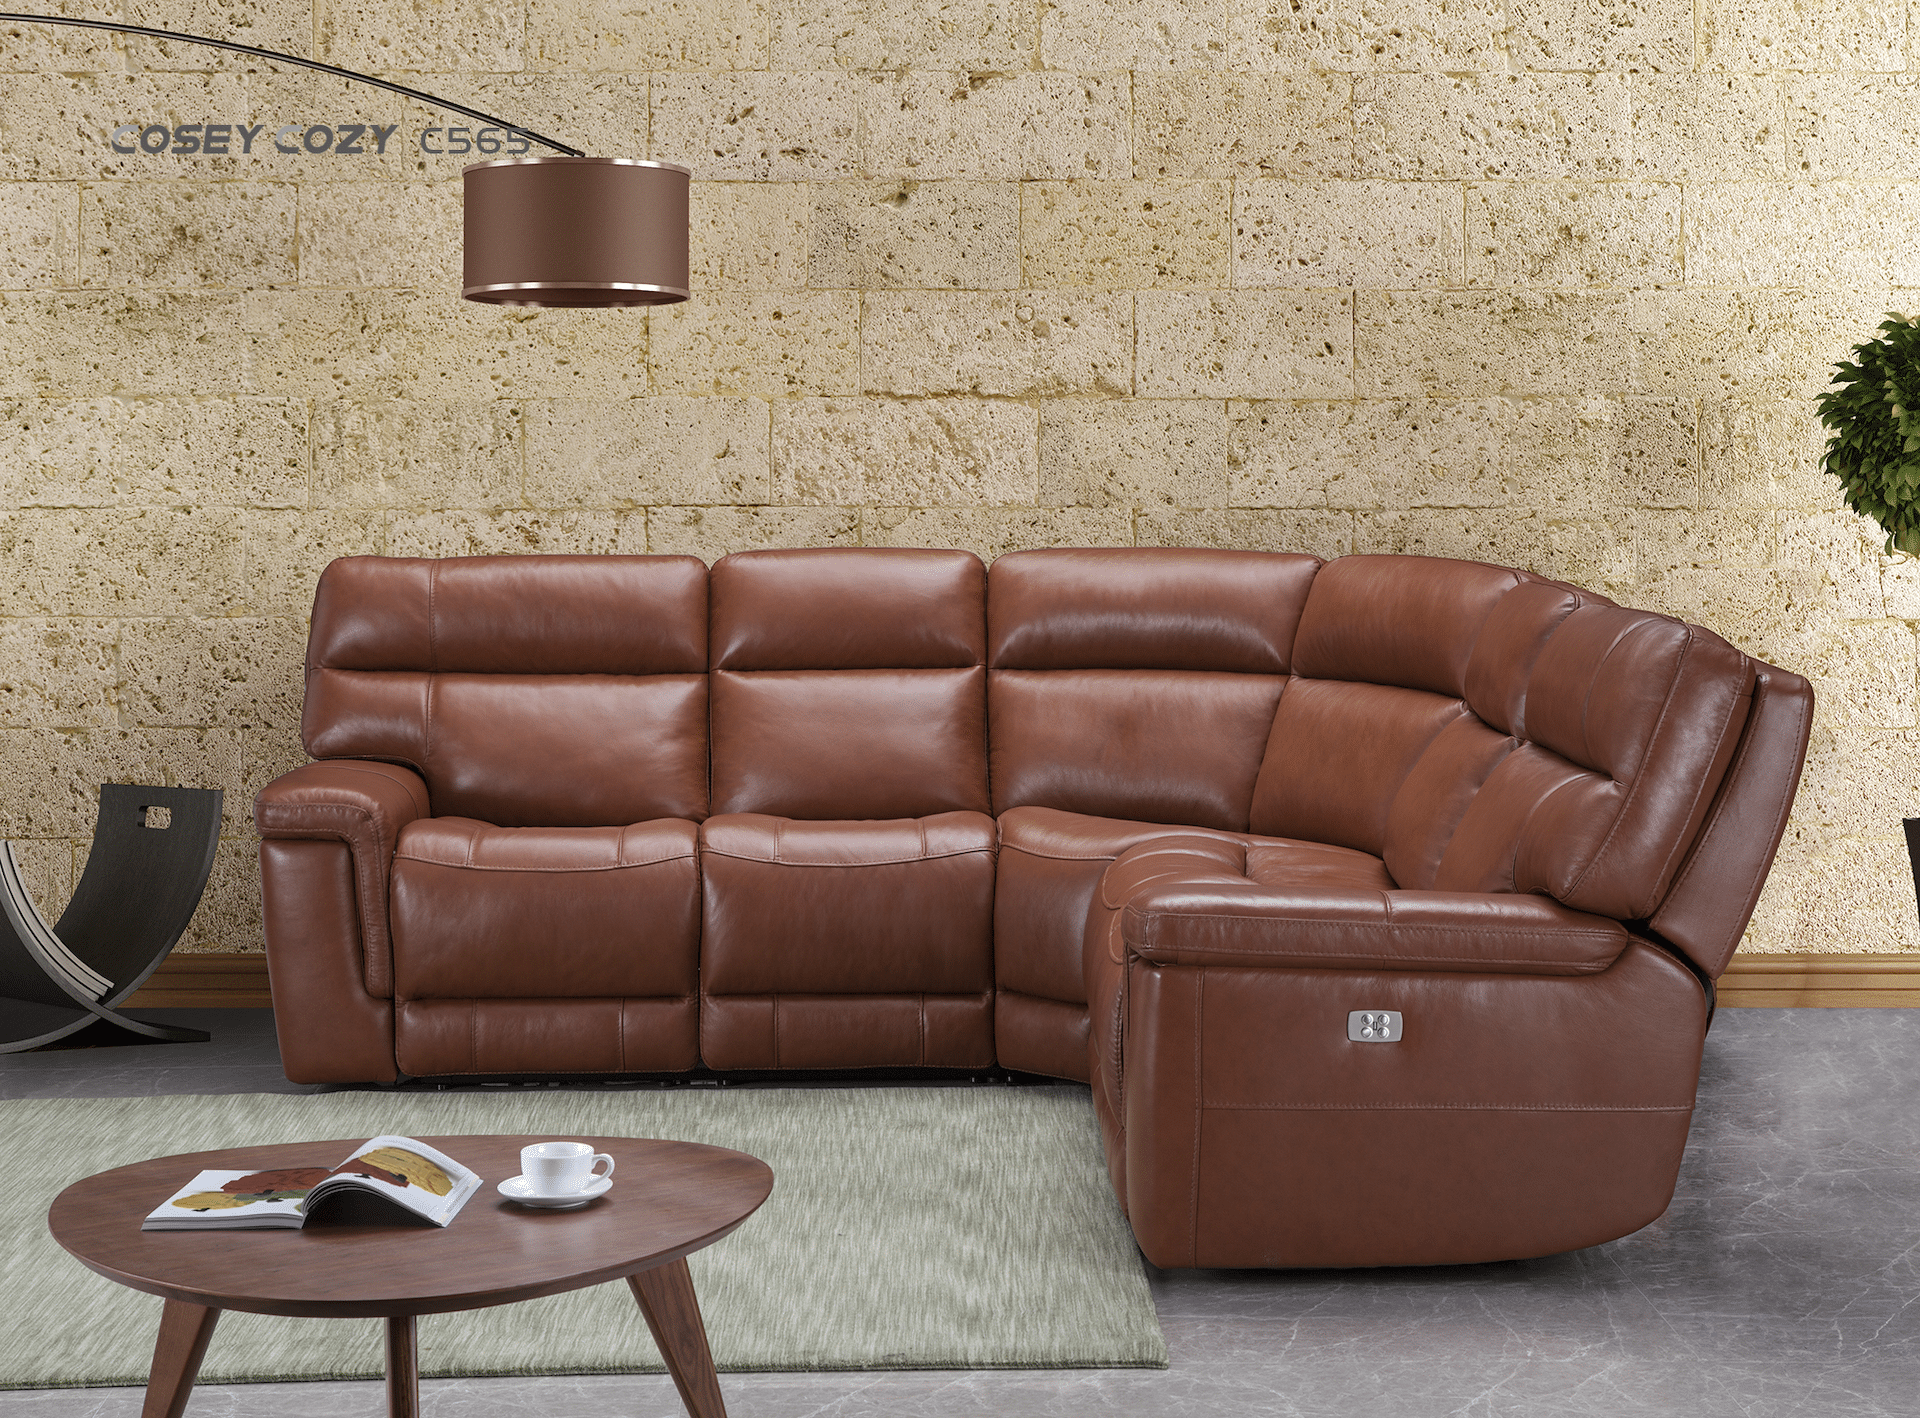 Step-by-Step: A Foolproof Method to Clean and Maintain Leather Sofas